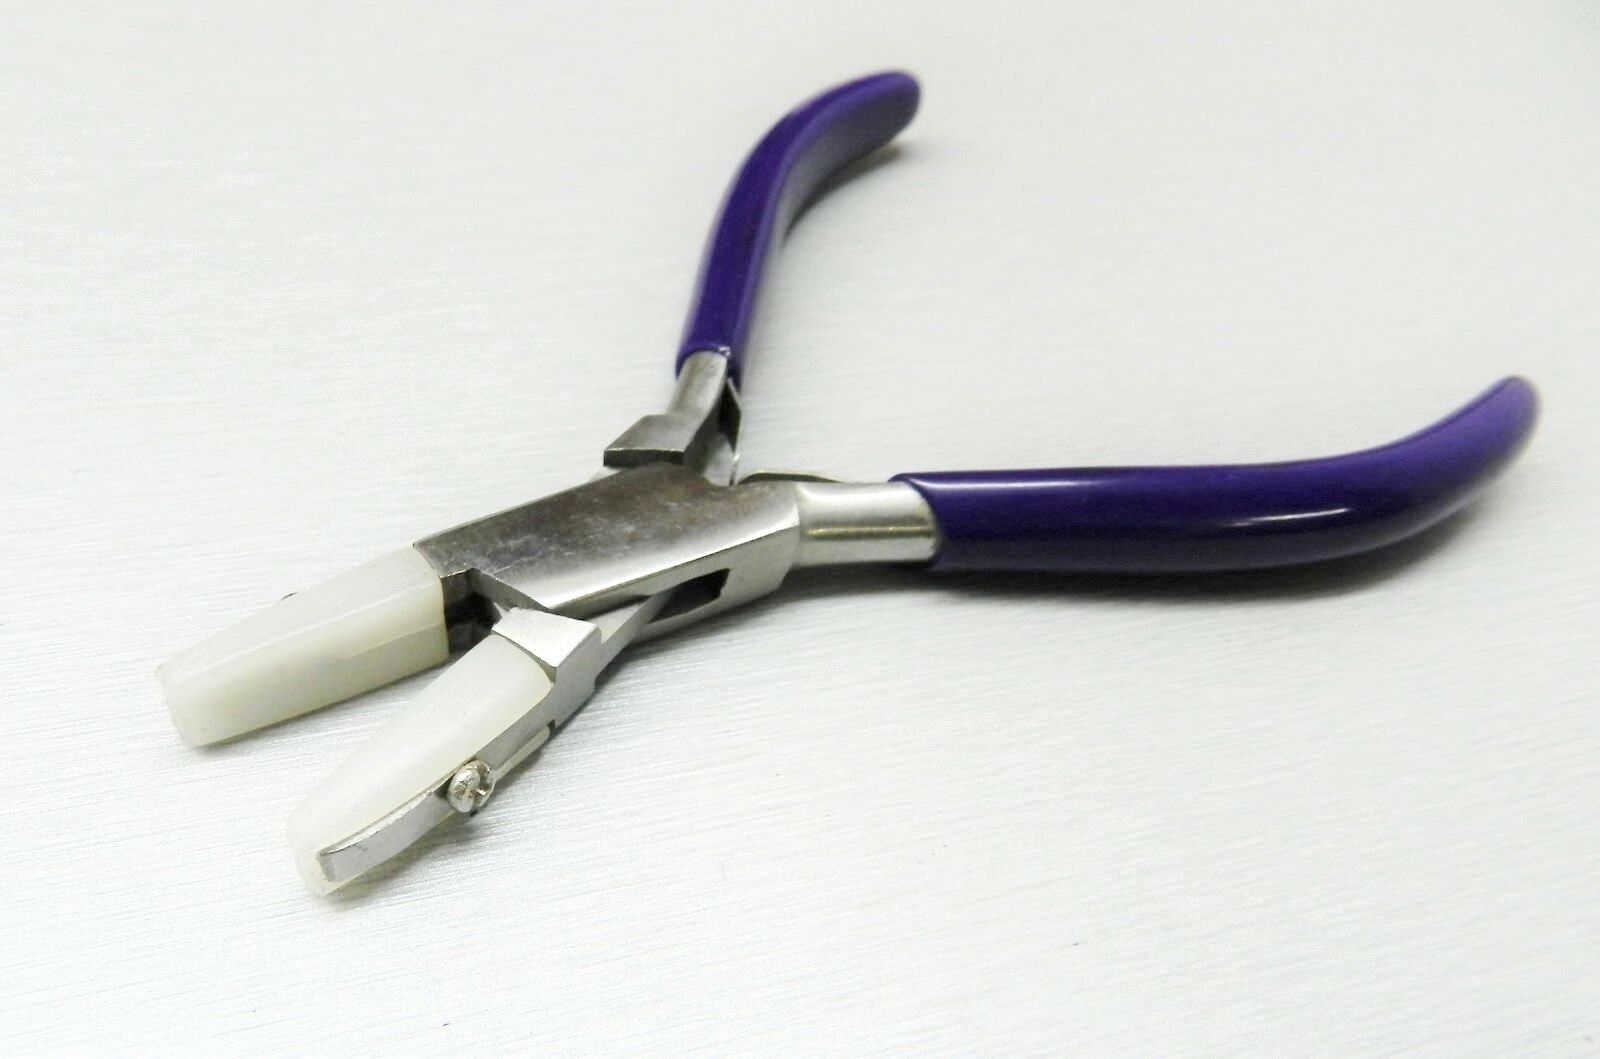 Pliers Flat Nylon Jaws Nose Jewelry Bead Wire Work Tool Straighten Wire + 2 Jaws